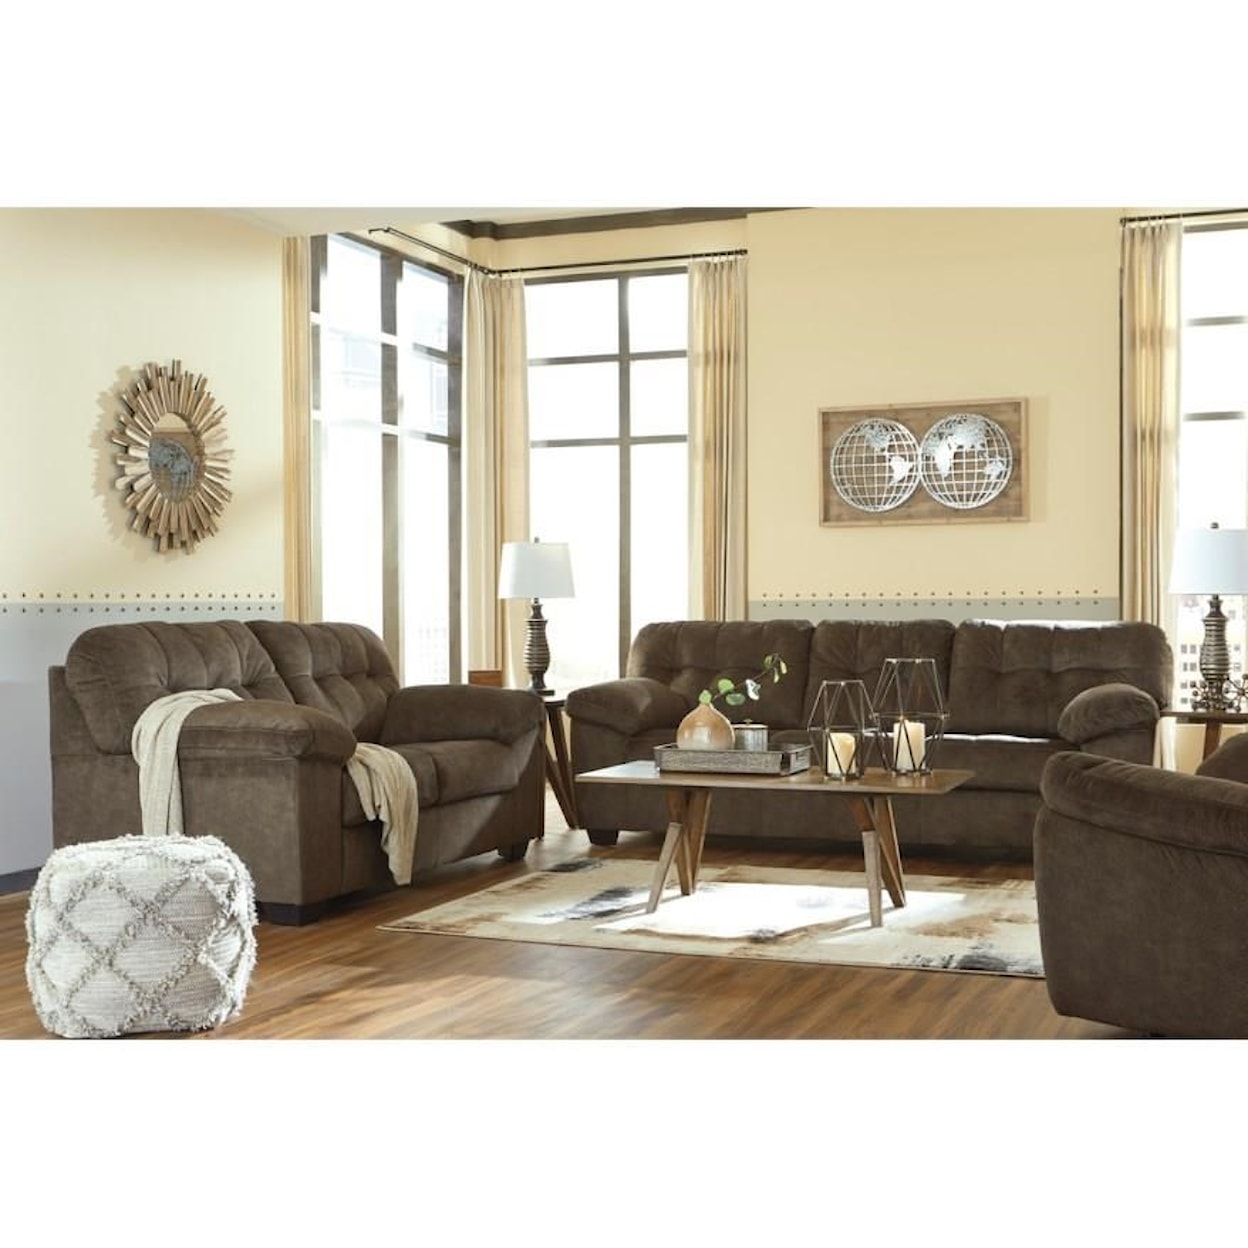 Signature Design by Ashley Accrington 8pc Living Room Group